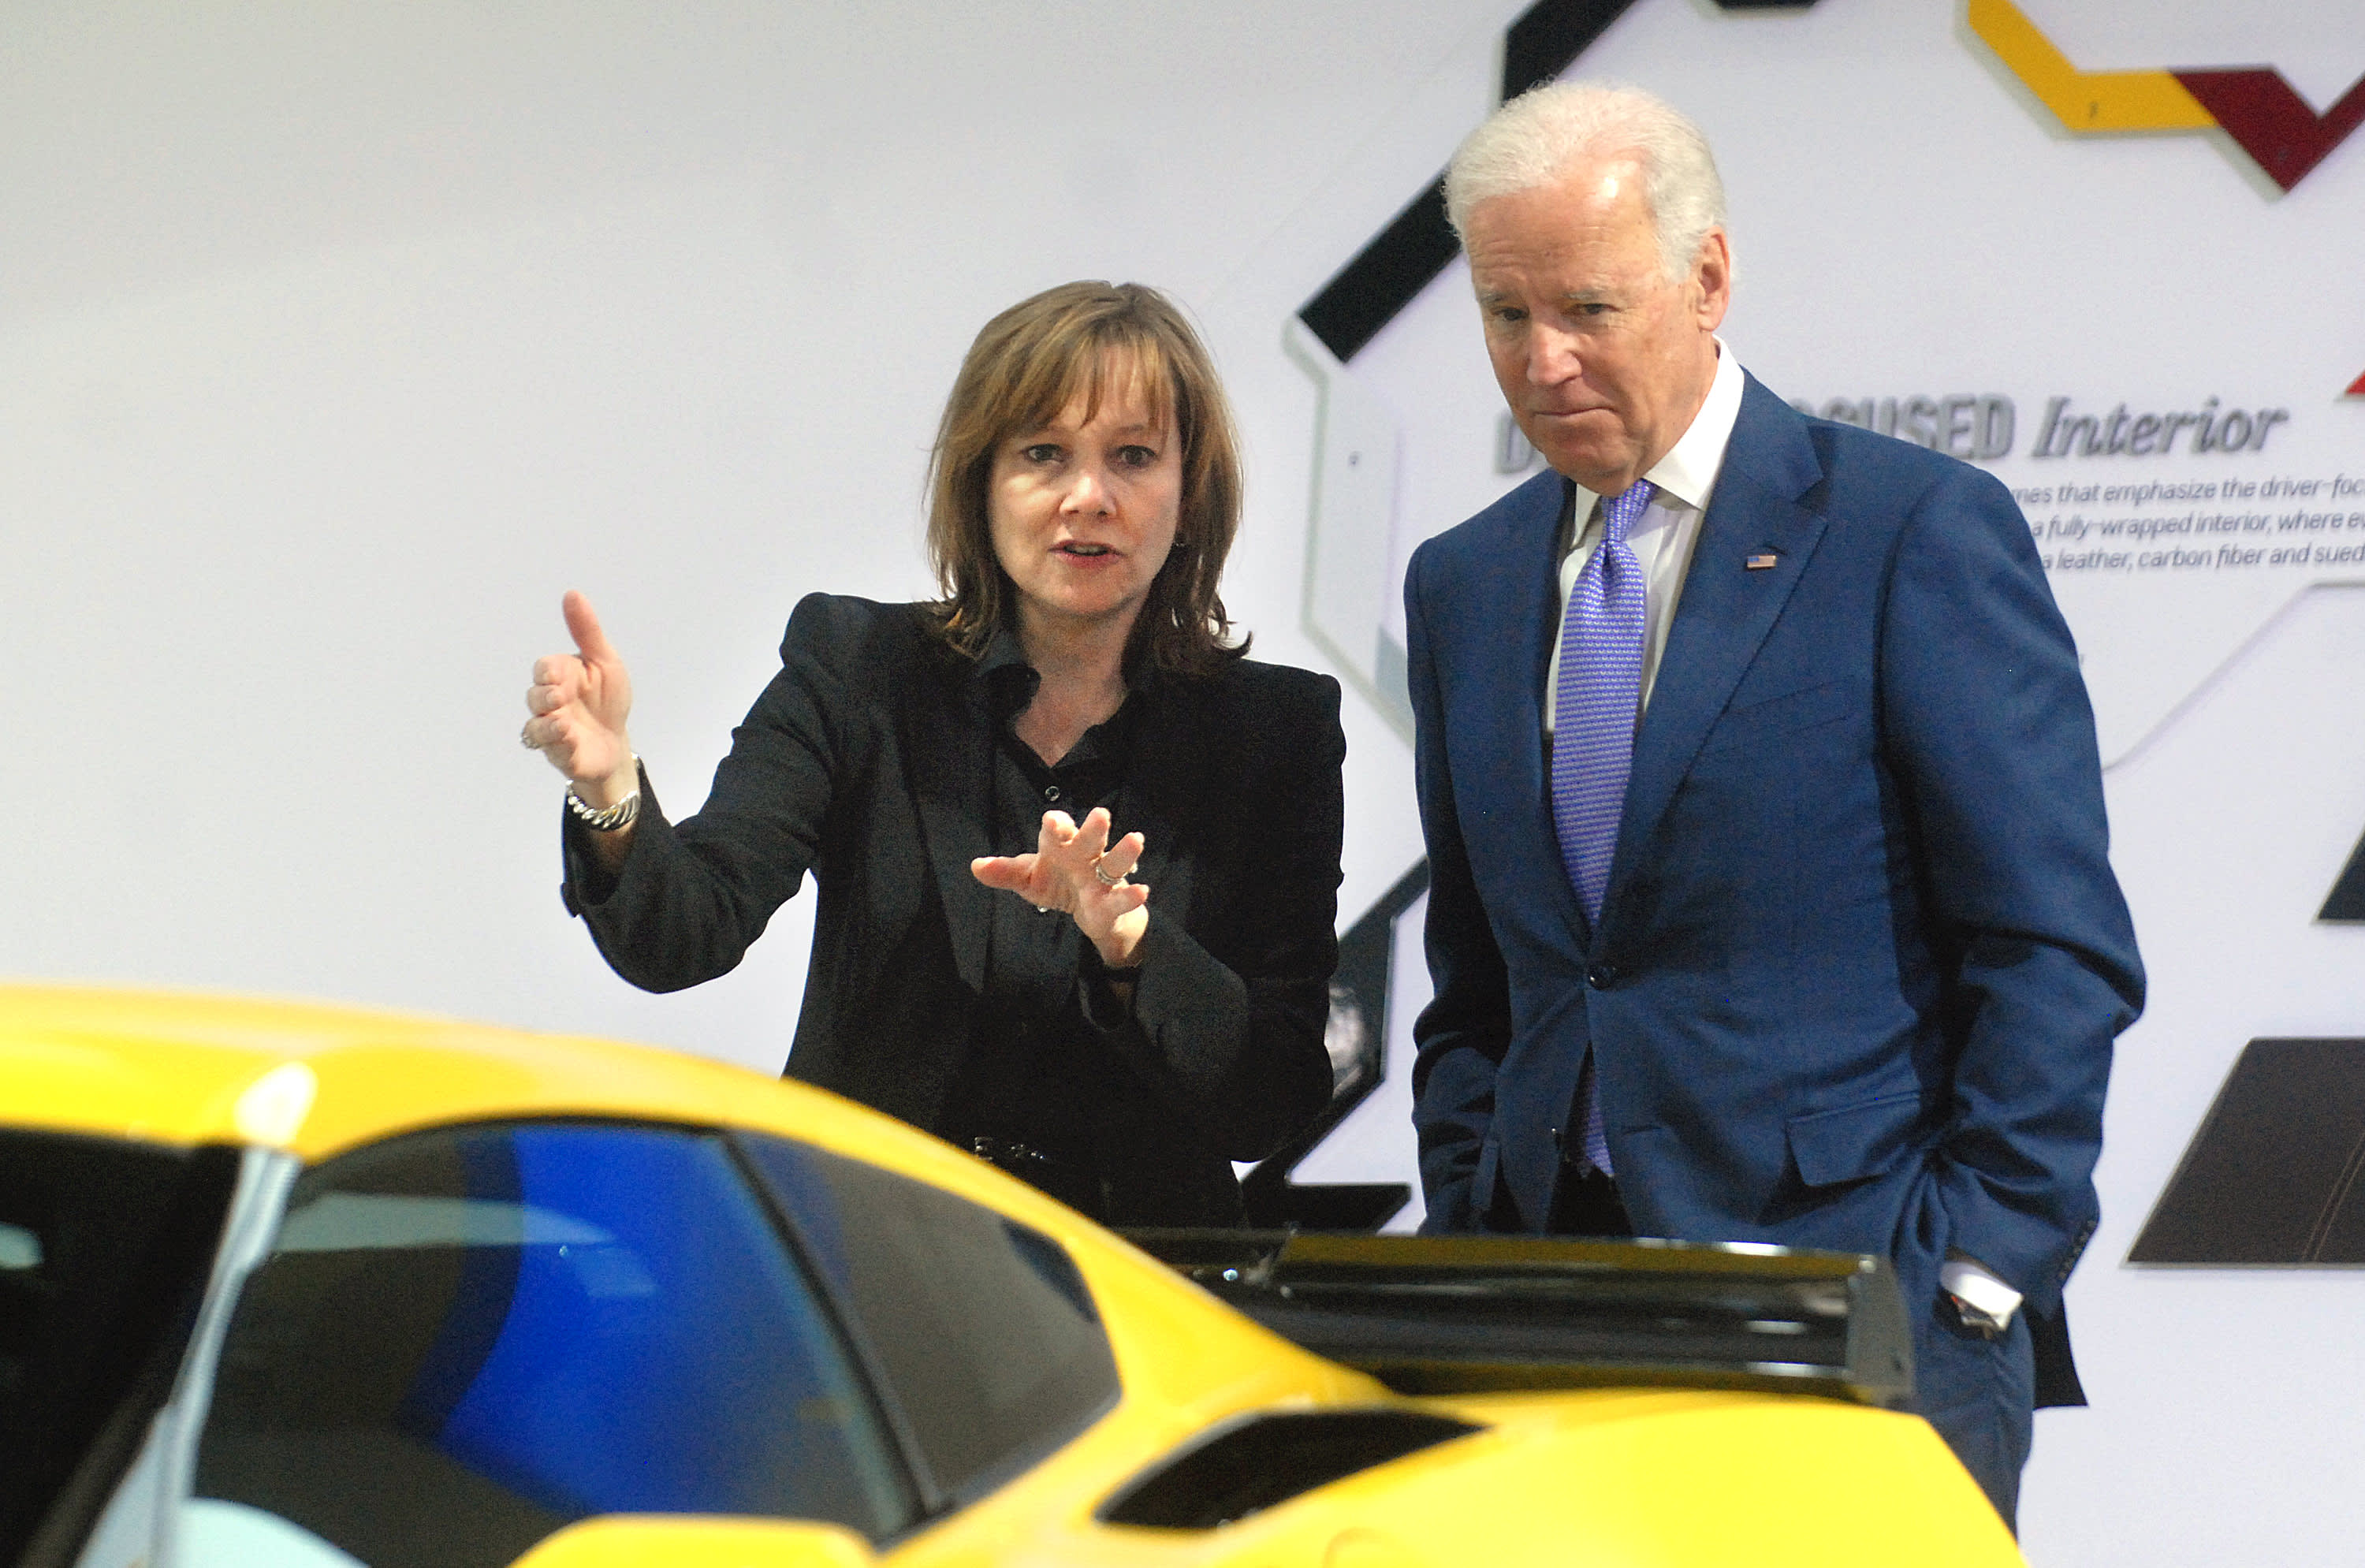 Biden pushes for EVs to make up 40% or more of U.S. auto sales by 2030